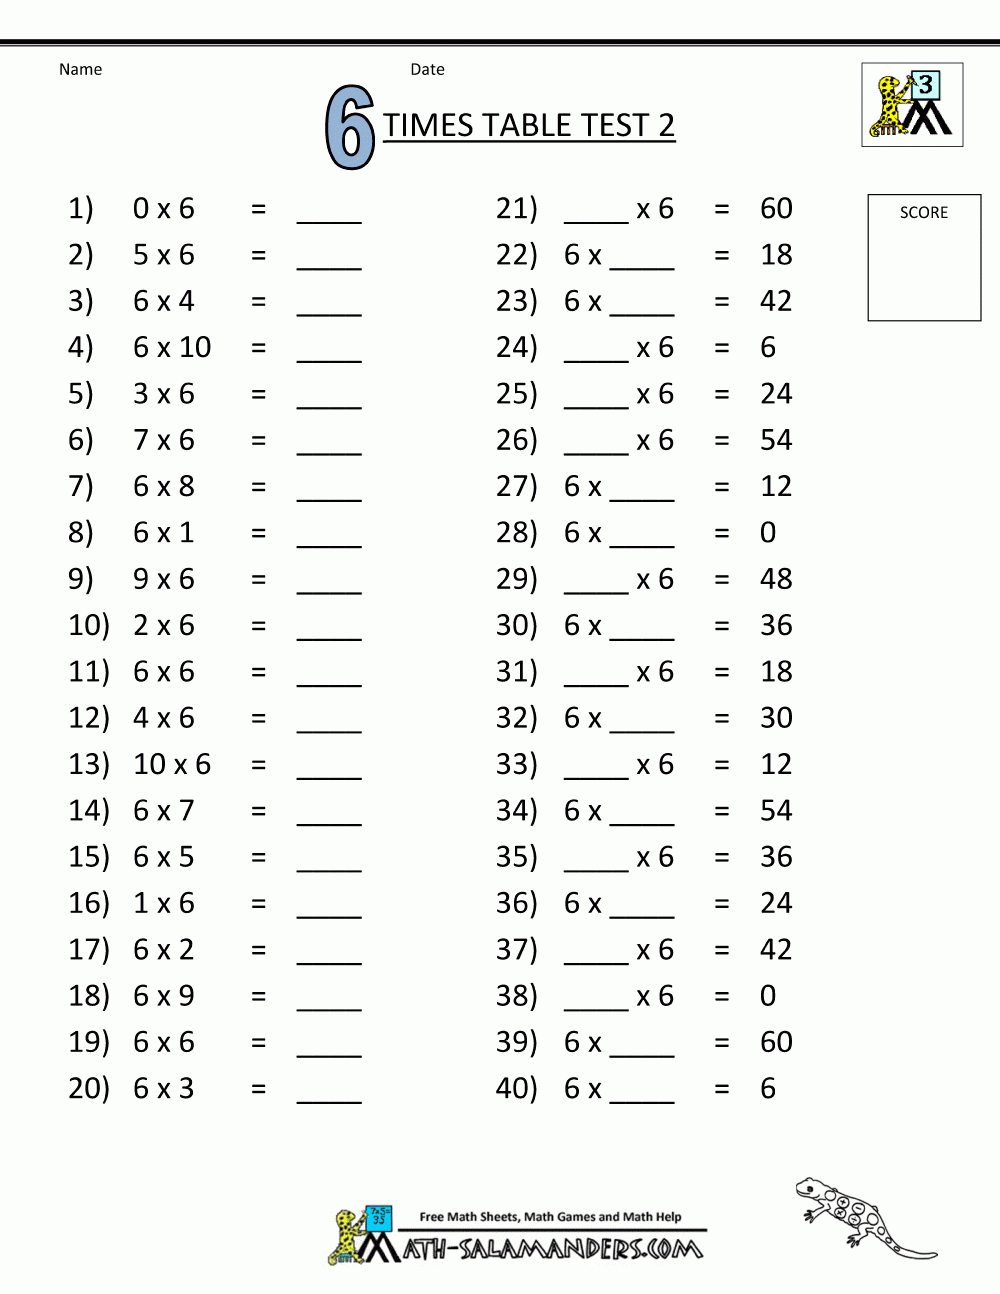 Times Tables Tests - 6 7 8 9 11 12 Times Tables throughout Multiplication Worksheets 6 7 8 9